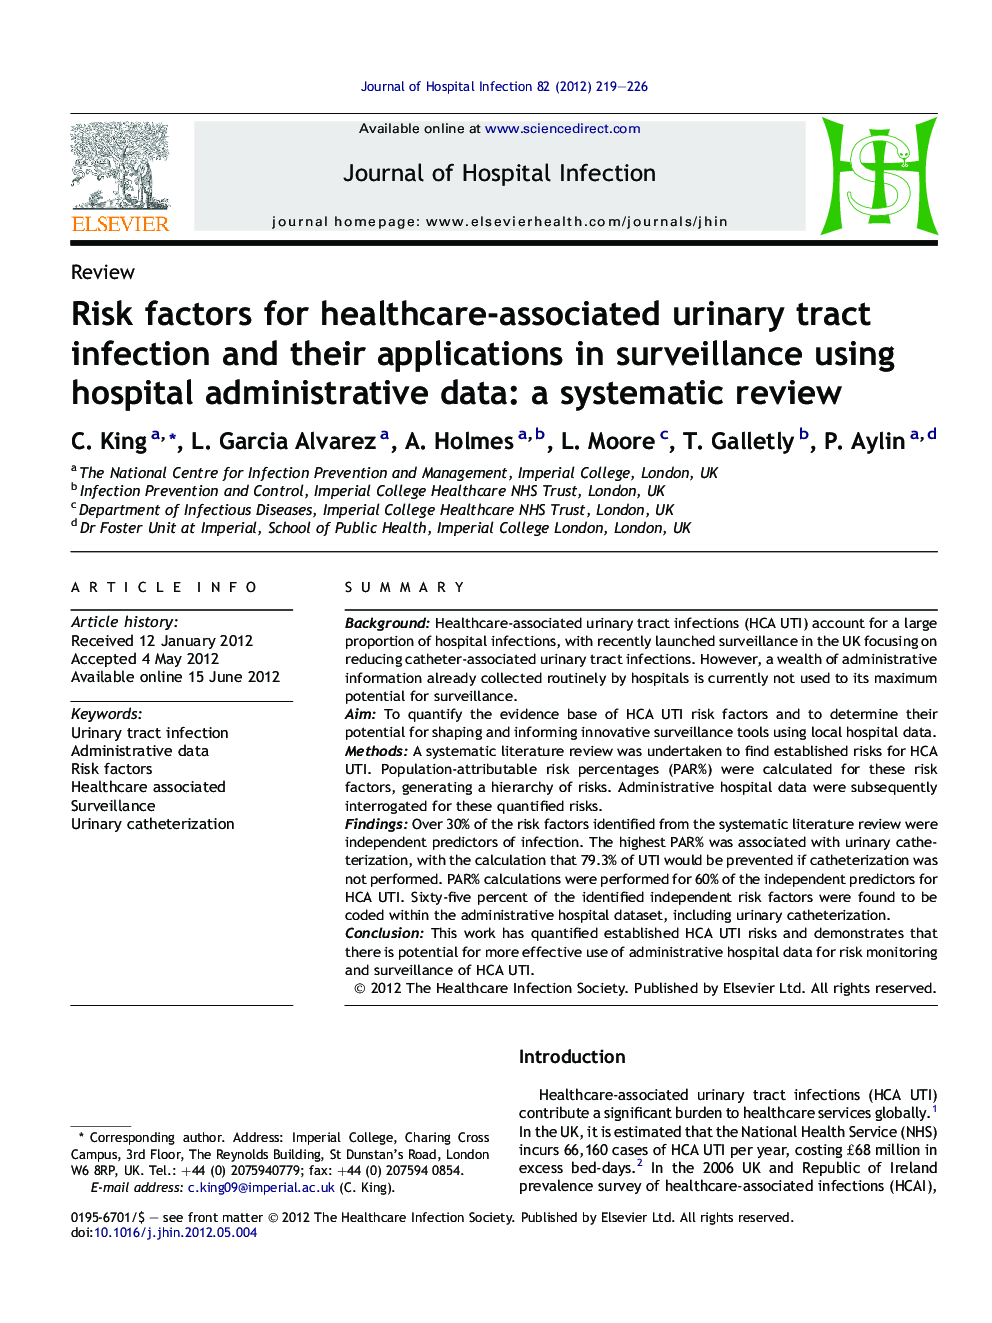 Risk factors for healthcare-associated urinary tract infection and their applications in surveillance using hospital administrative data: a systematic review